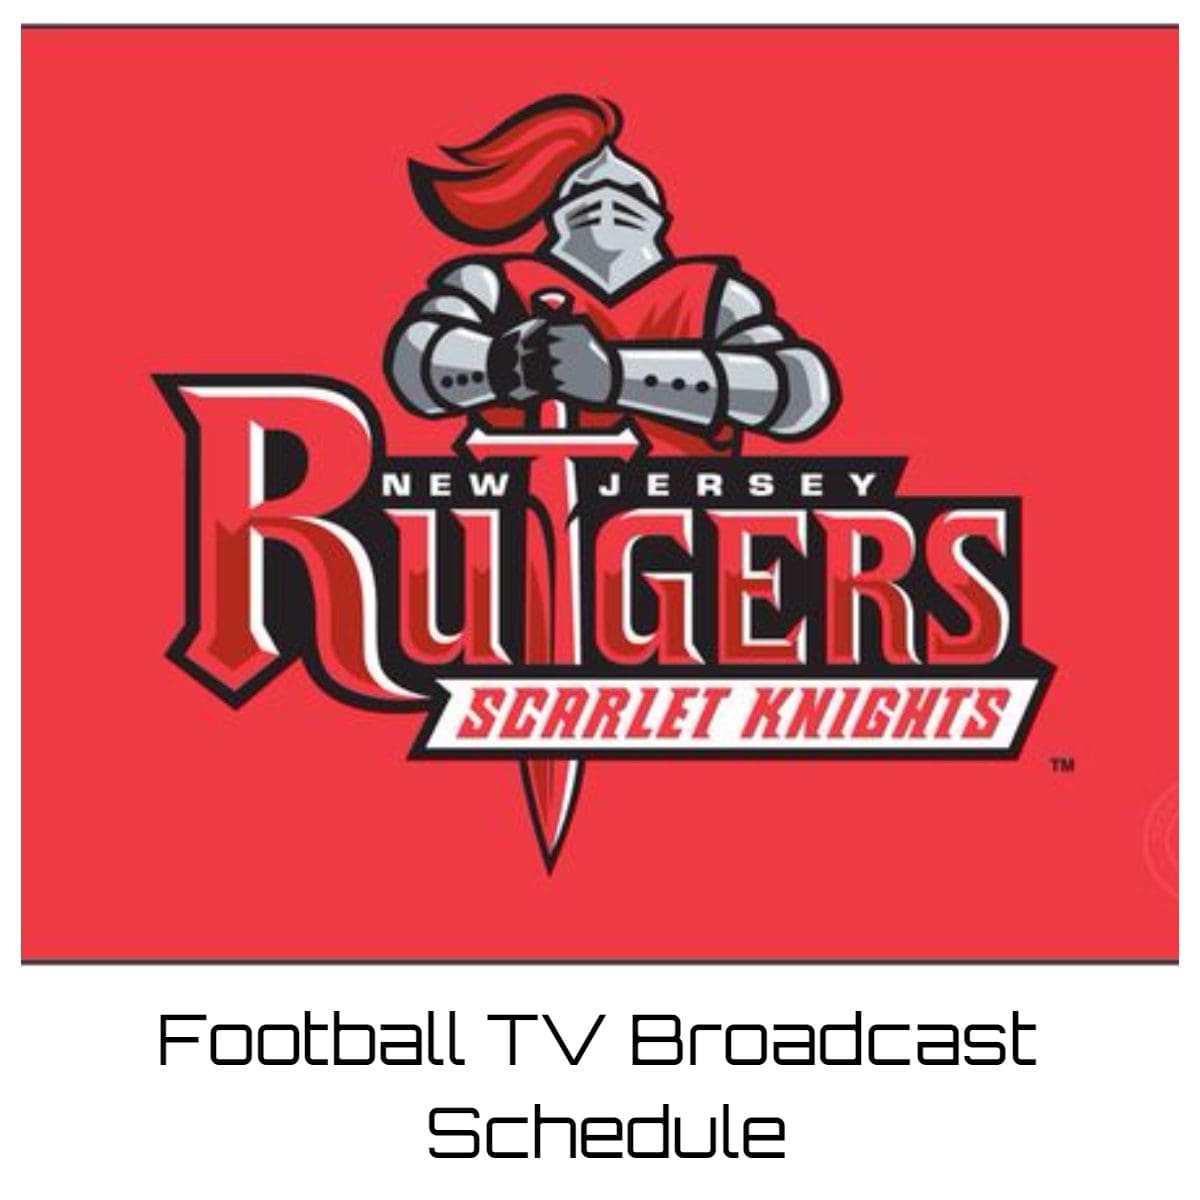 Rutgers Scarlet Knights Football TV Broadcast Schedule